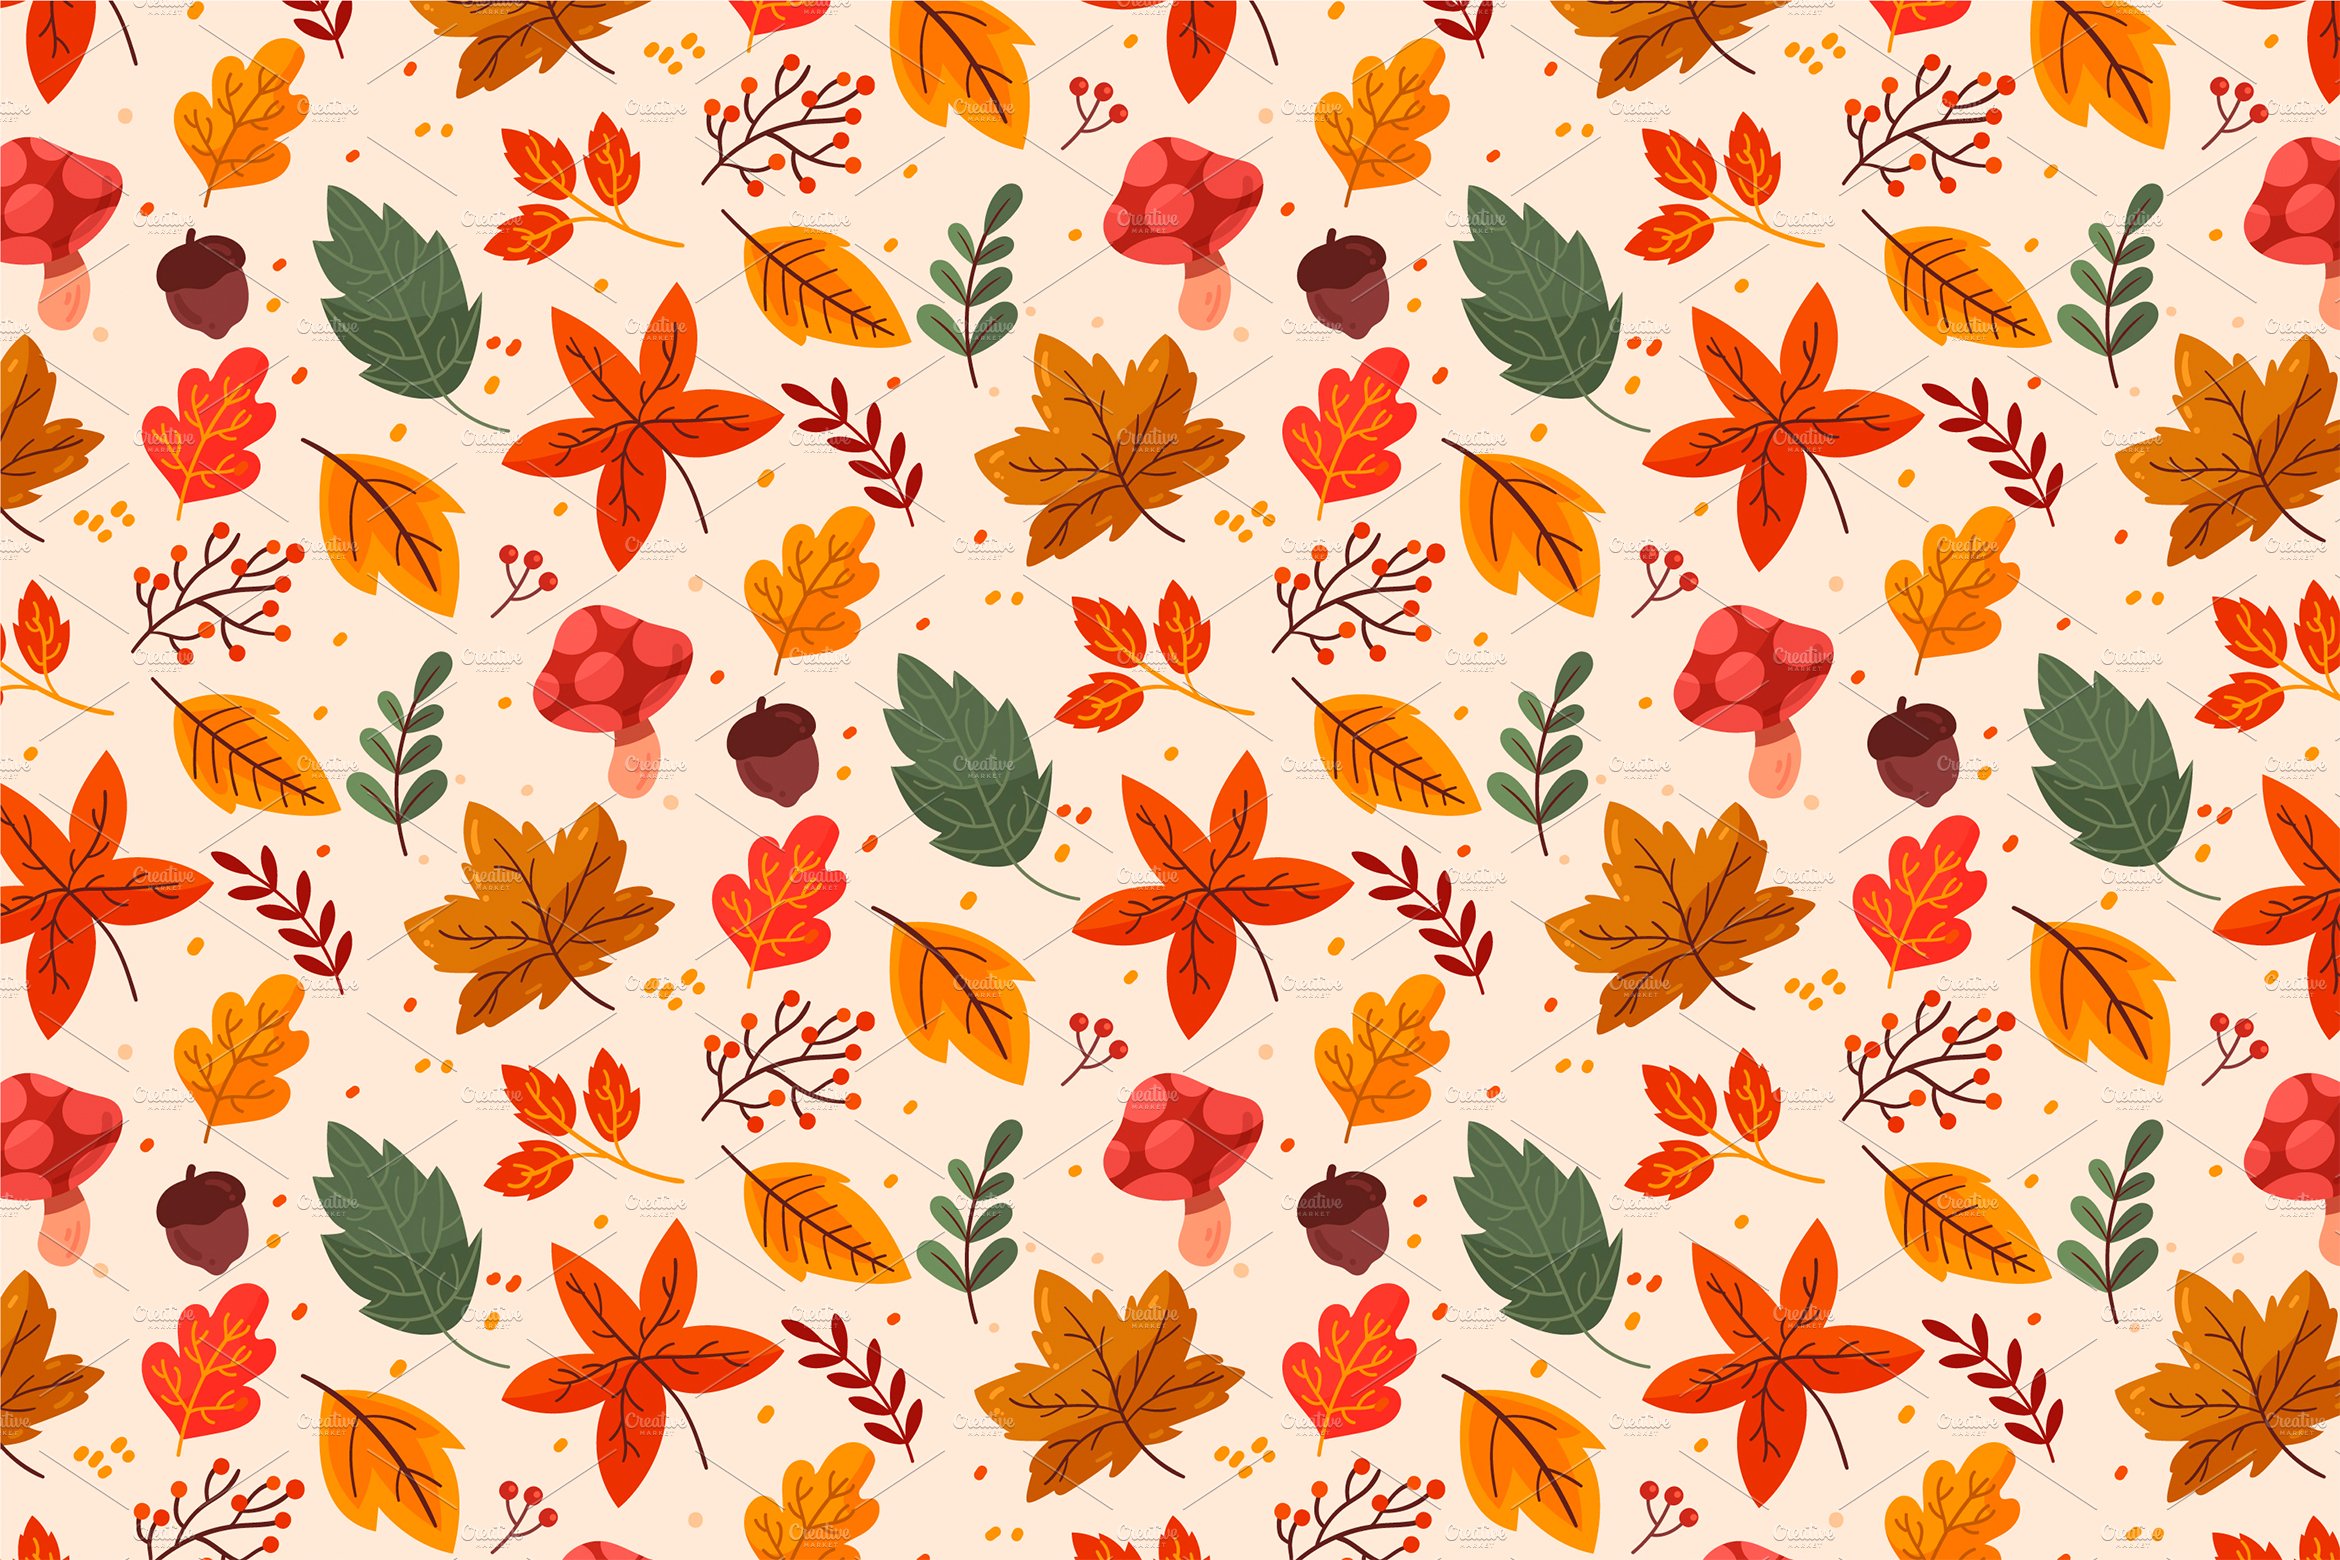 Autumn Pattern cover image.